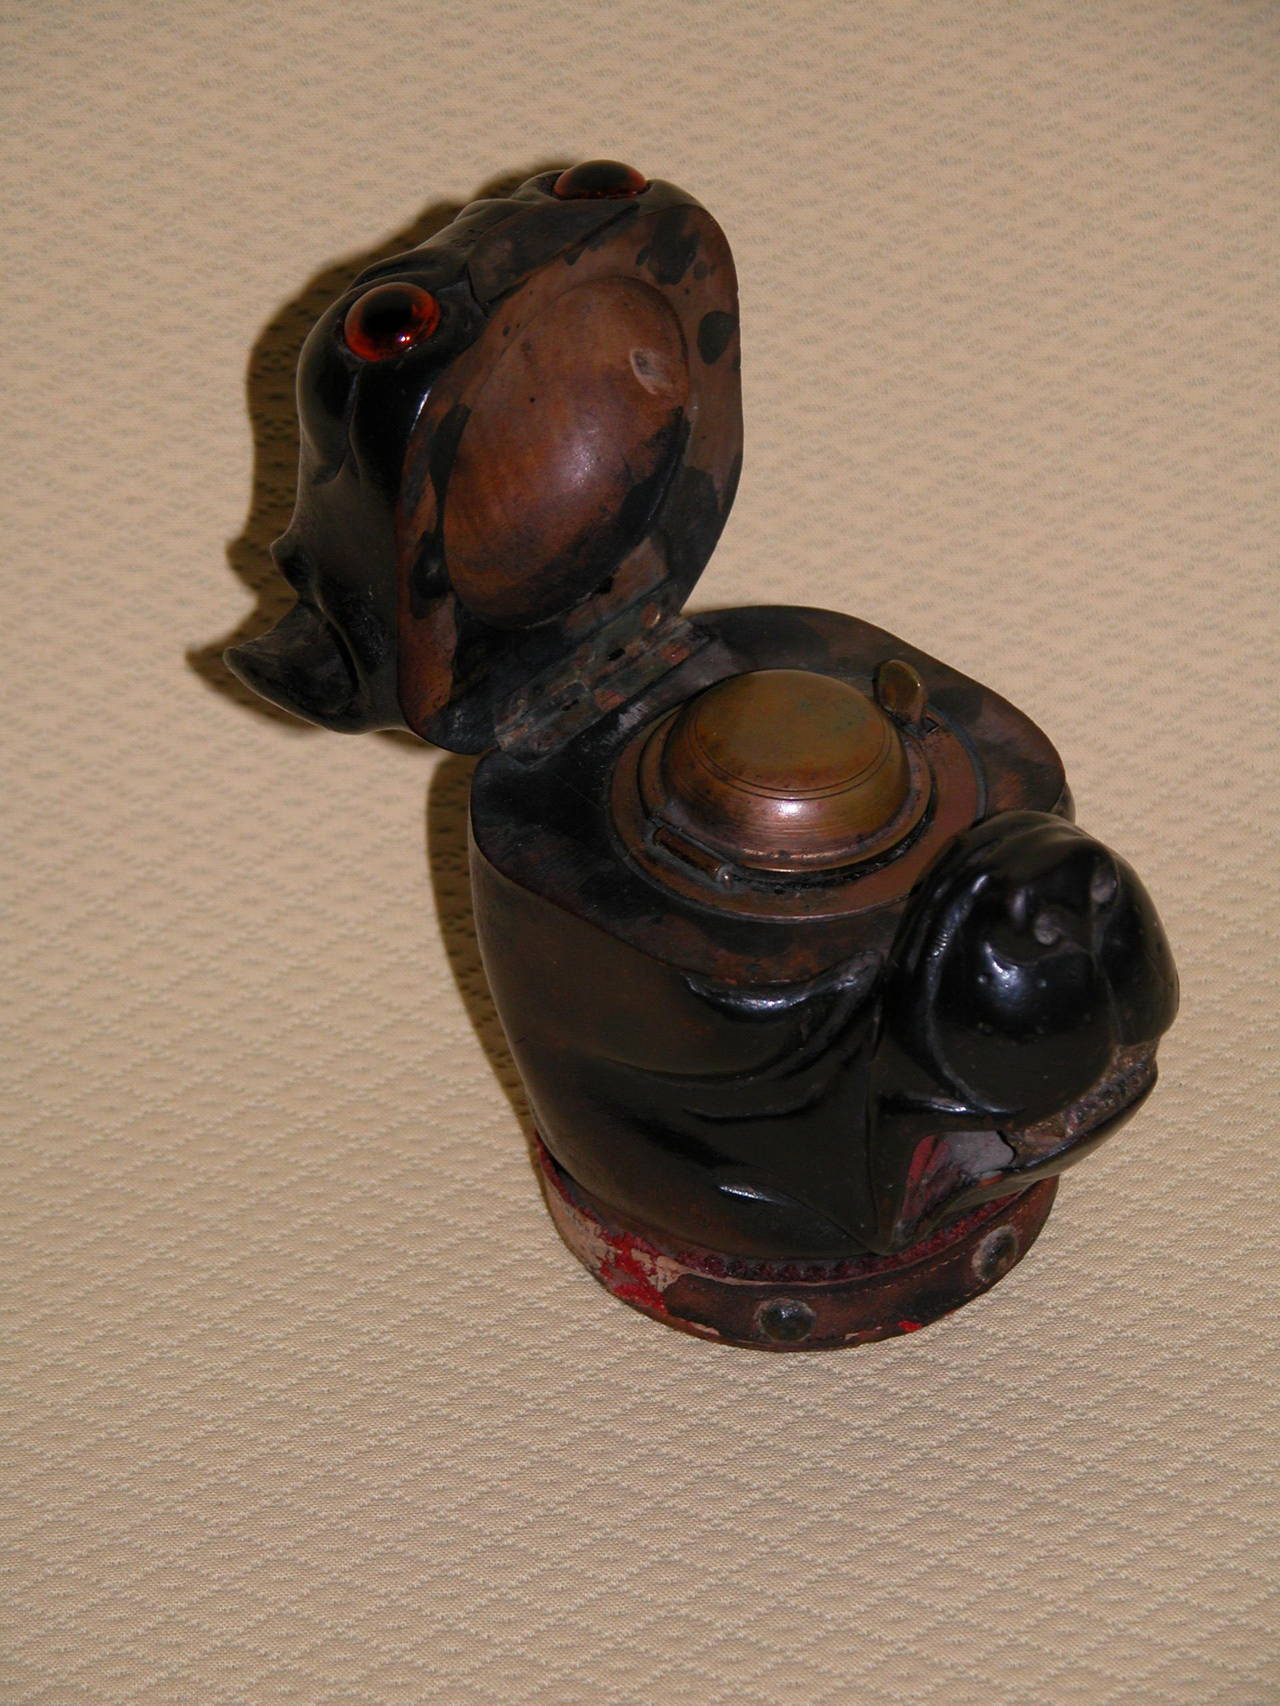 British Hand-Carved Wood Inkwell in Form of Pug or Bulldog